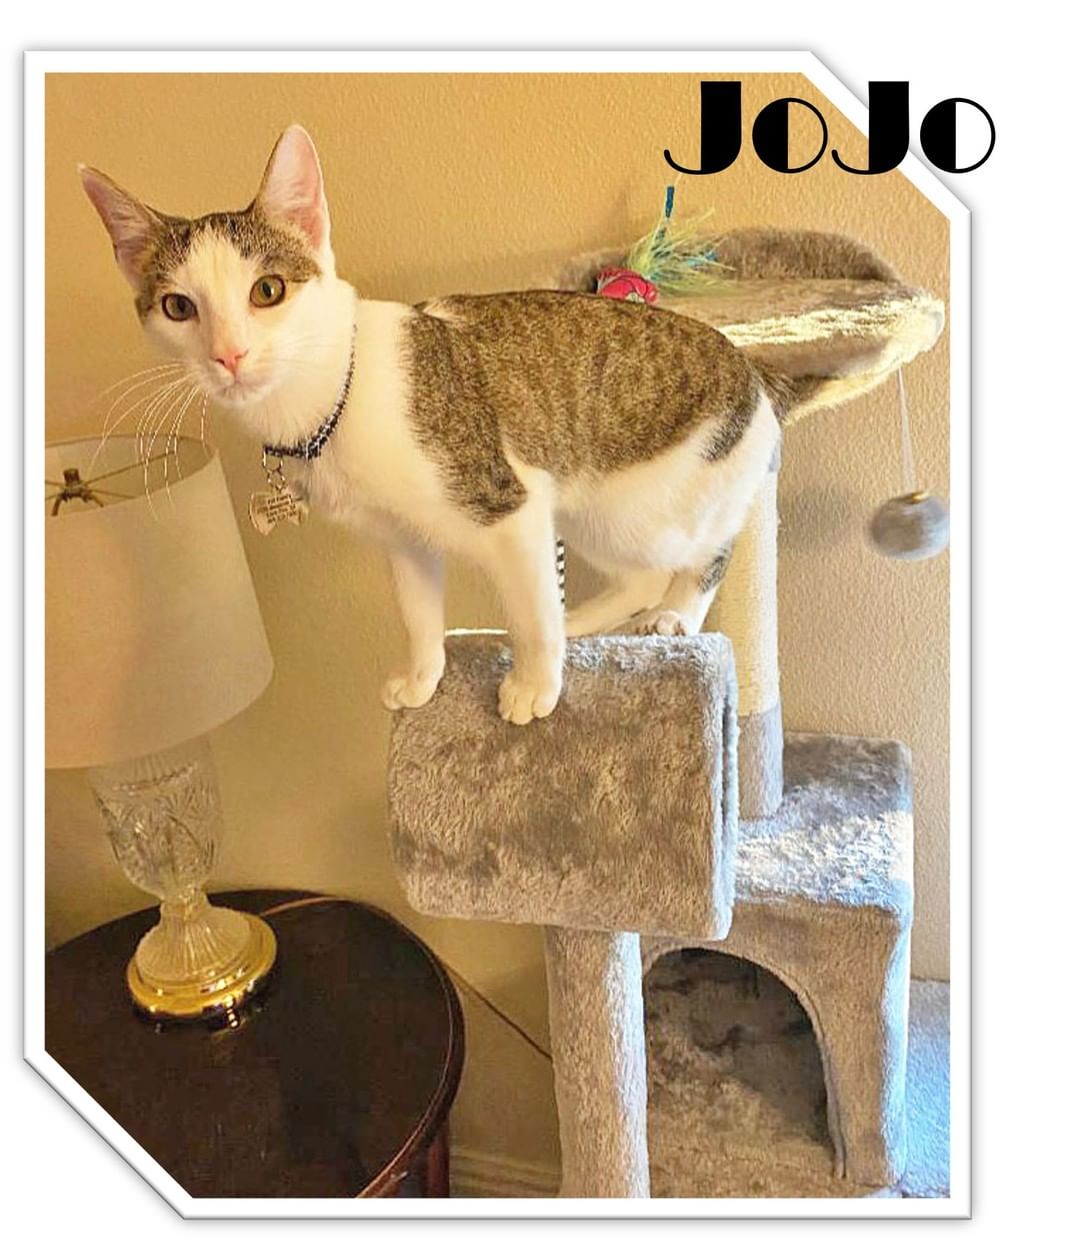 💖🏡💖 Forever Home Update:  Joey is now JoJo!  His adopters say he has a GREAT purrsonality and the cutest kitten face!  JoJo loves his toys, his kitty perch, and sleeping on the sunny windowsill.  JoJo is right on schedule… acclimating purrfectly with his two new doggo fursibs based on his adopters’ thoughtful introduction plan.  His parents say, “We absolutely love him!  Thank you so much [FHS] for making this adoption process so easy and for giving us the special gift of sweet baby JoJo! ”